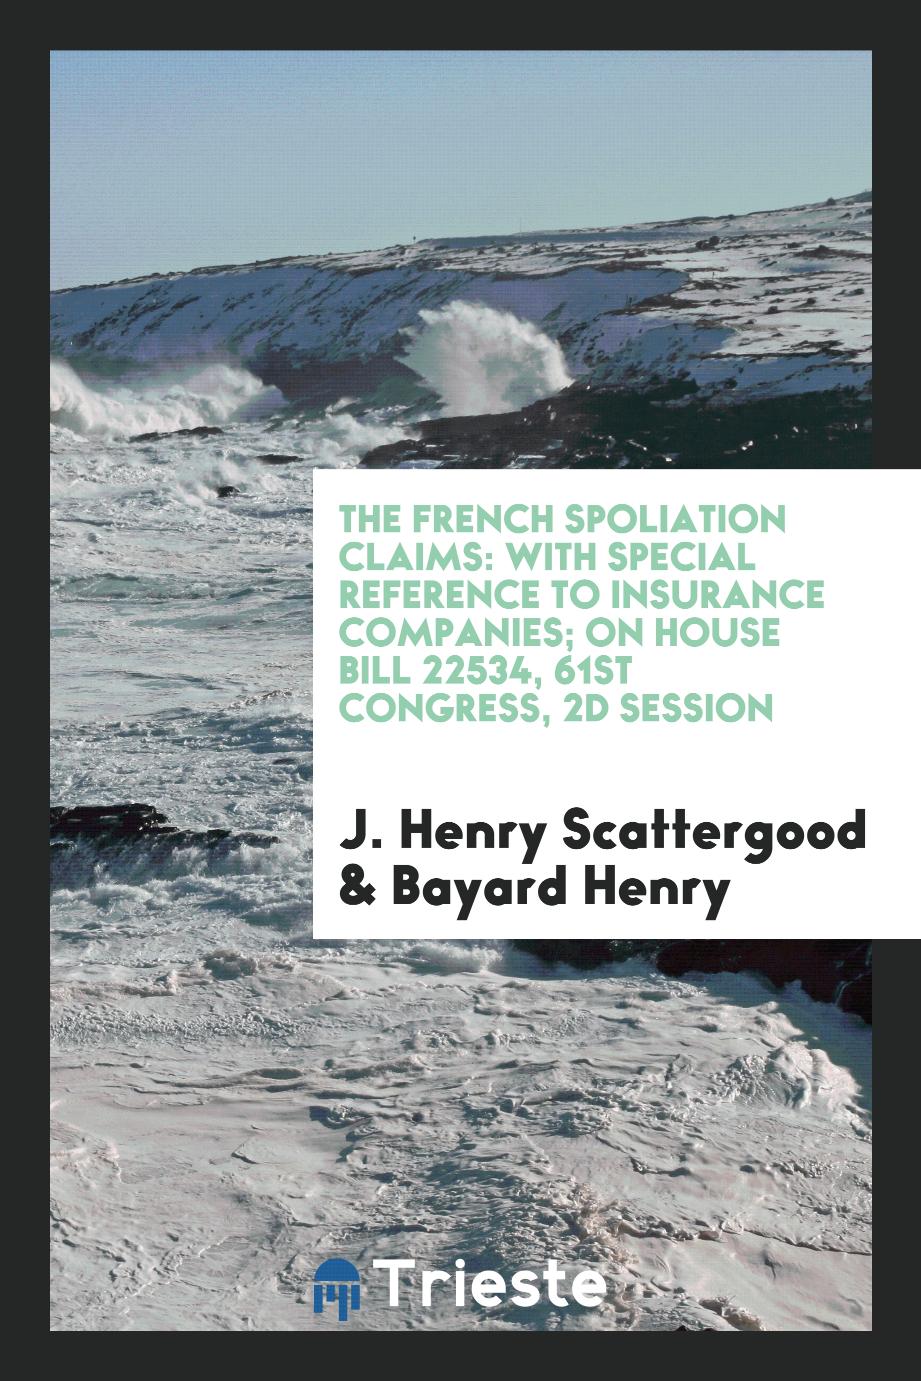 J. Henry Scattergood, Bayard Henry - The French Spoliation Claims: With Special Reference to Insurance Companies; On House Bill 22534, 61st Congress, 2d Session